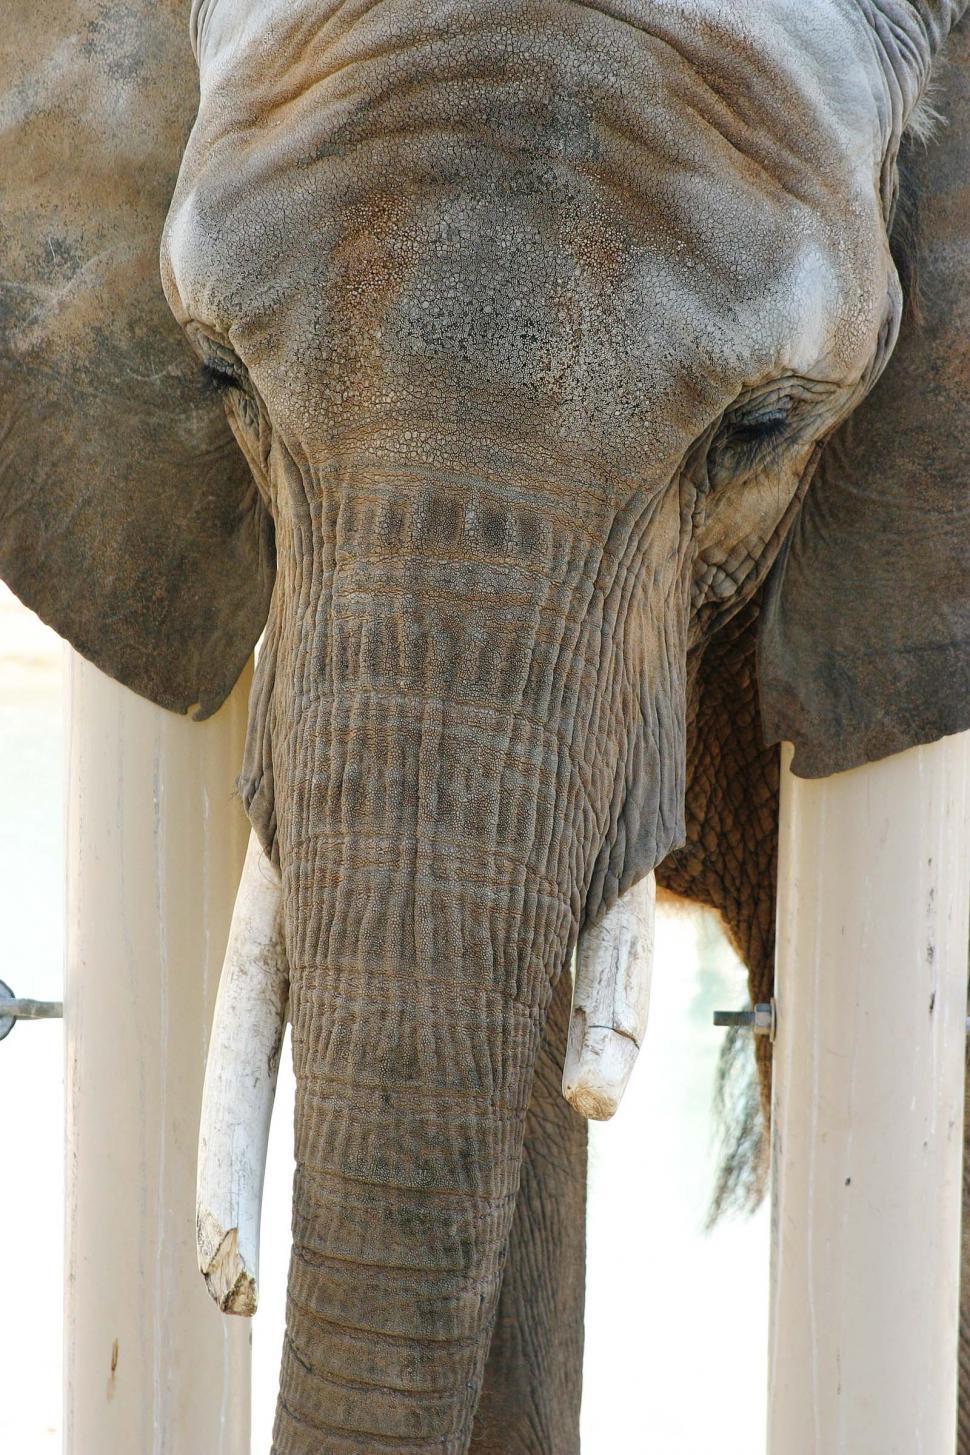 Free Image of Elephant Standing in Front of White Wall 